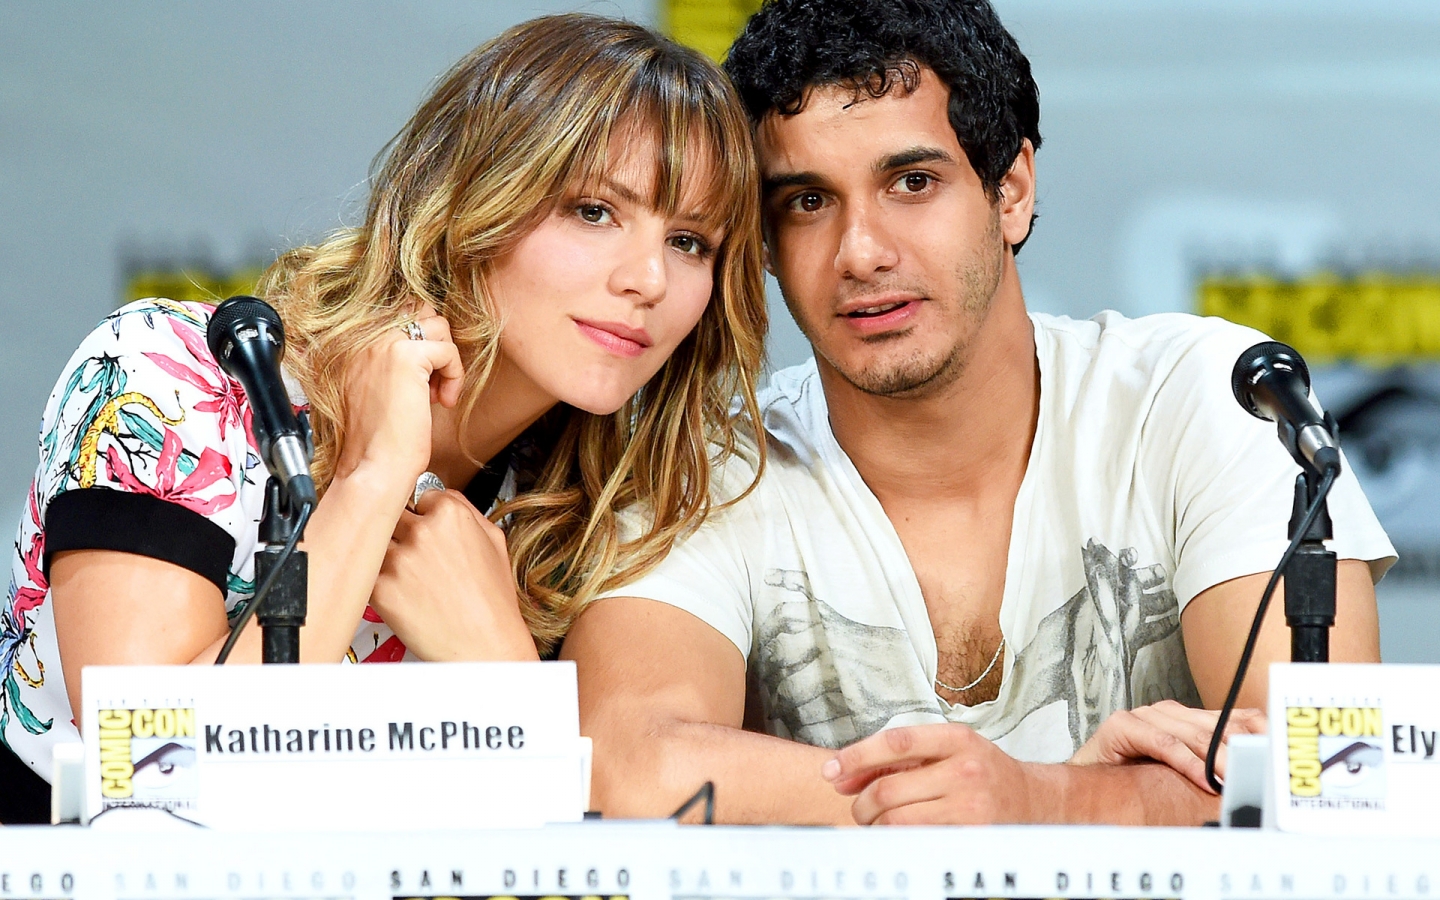 Katharine McPhee and Elyes Gabel for 1440 x 900 widescreen resolution